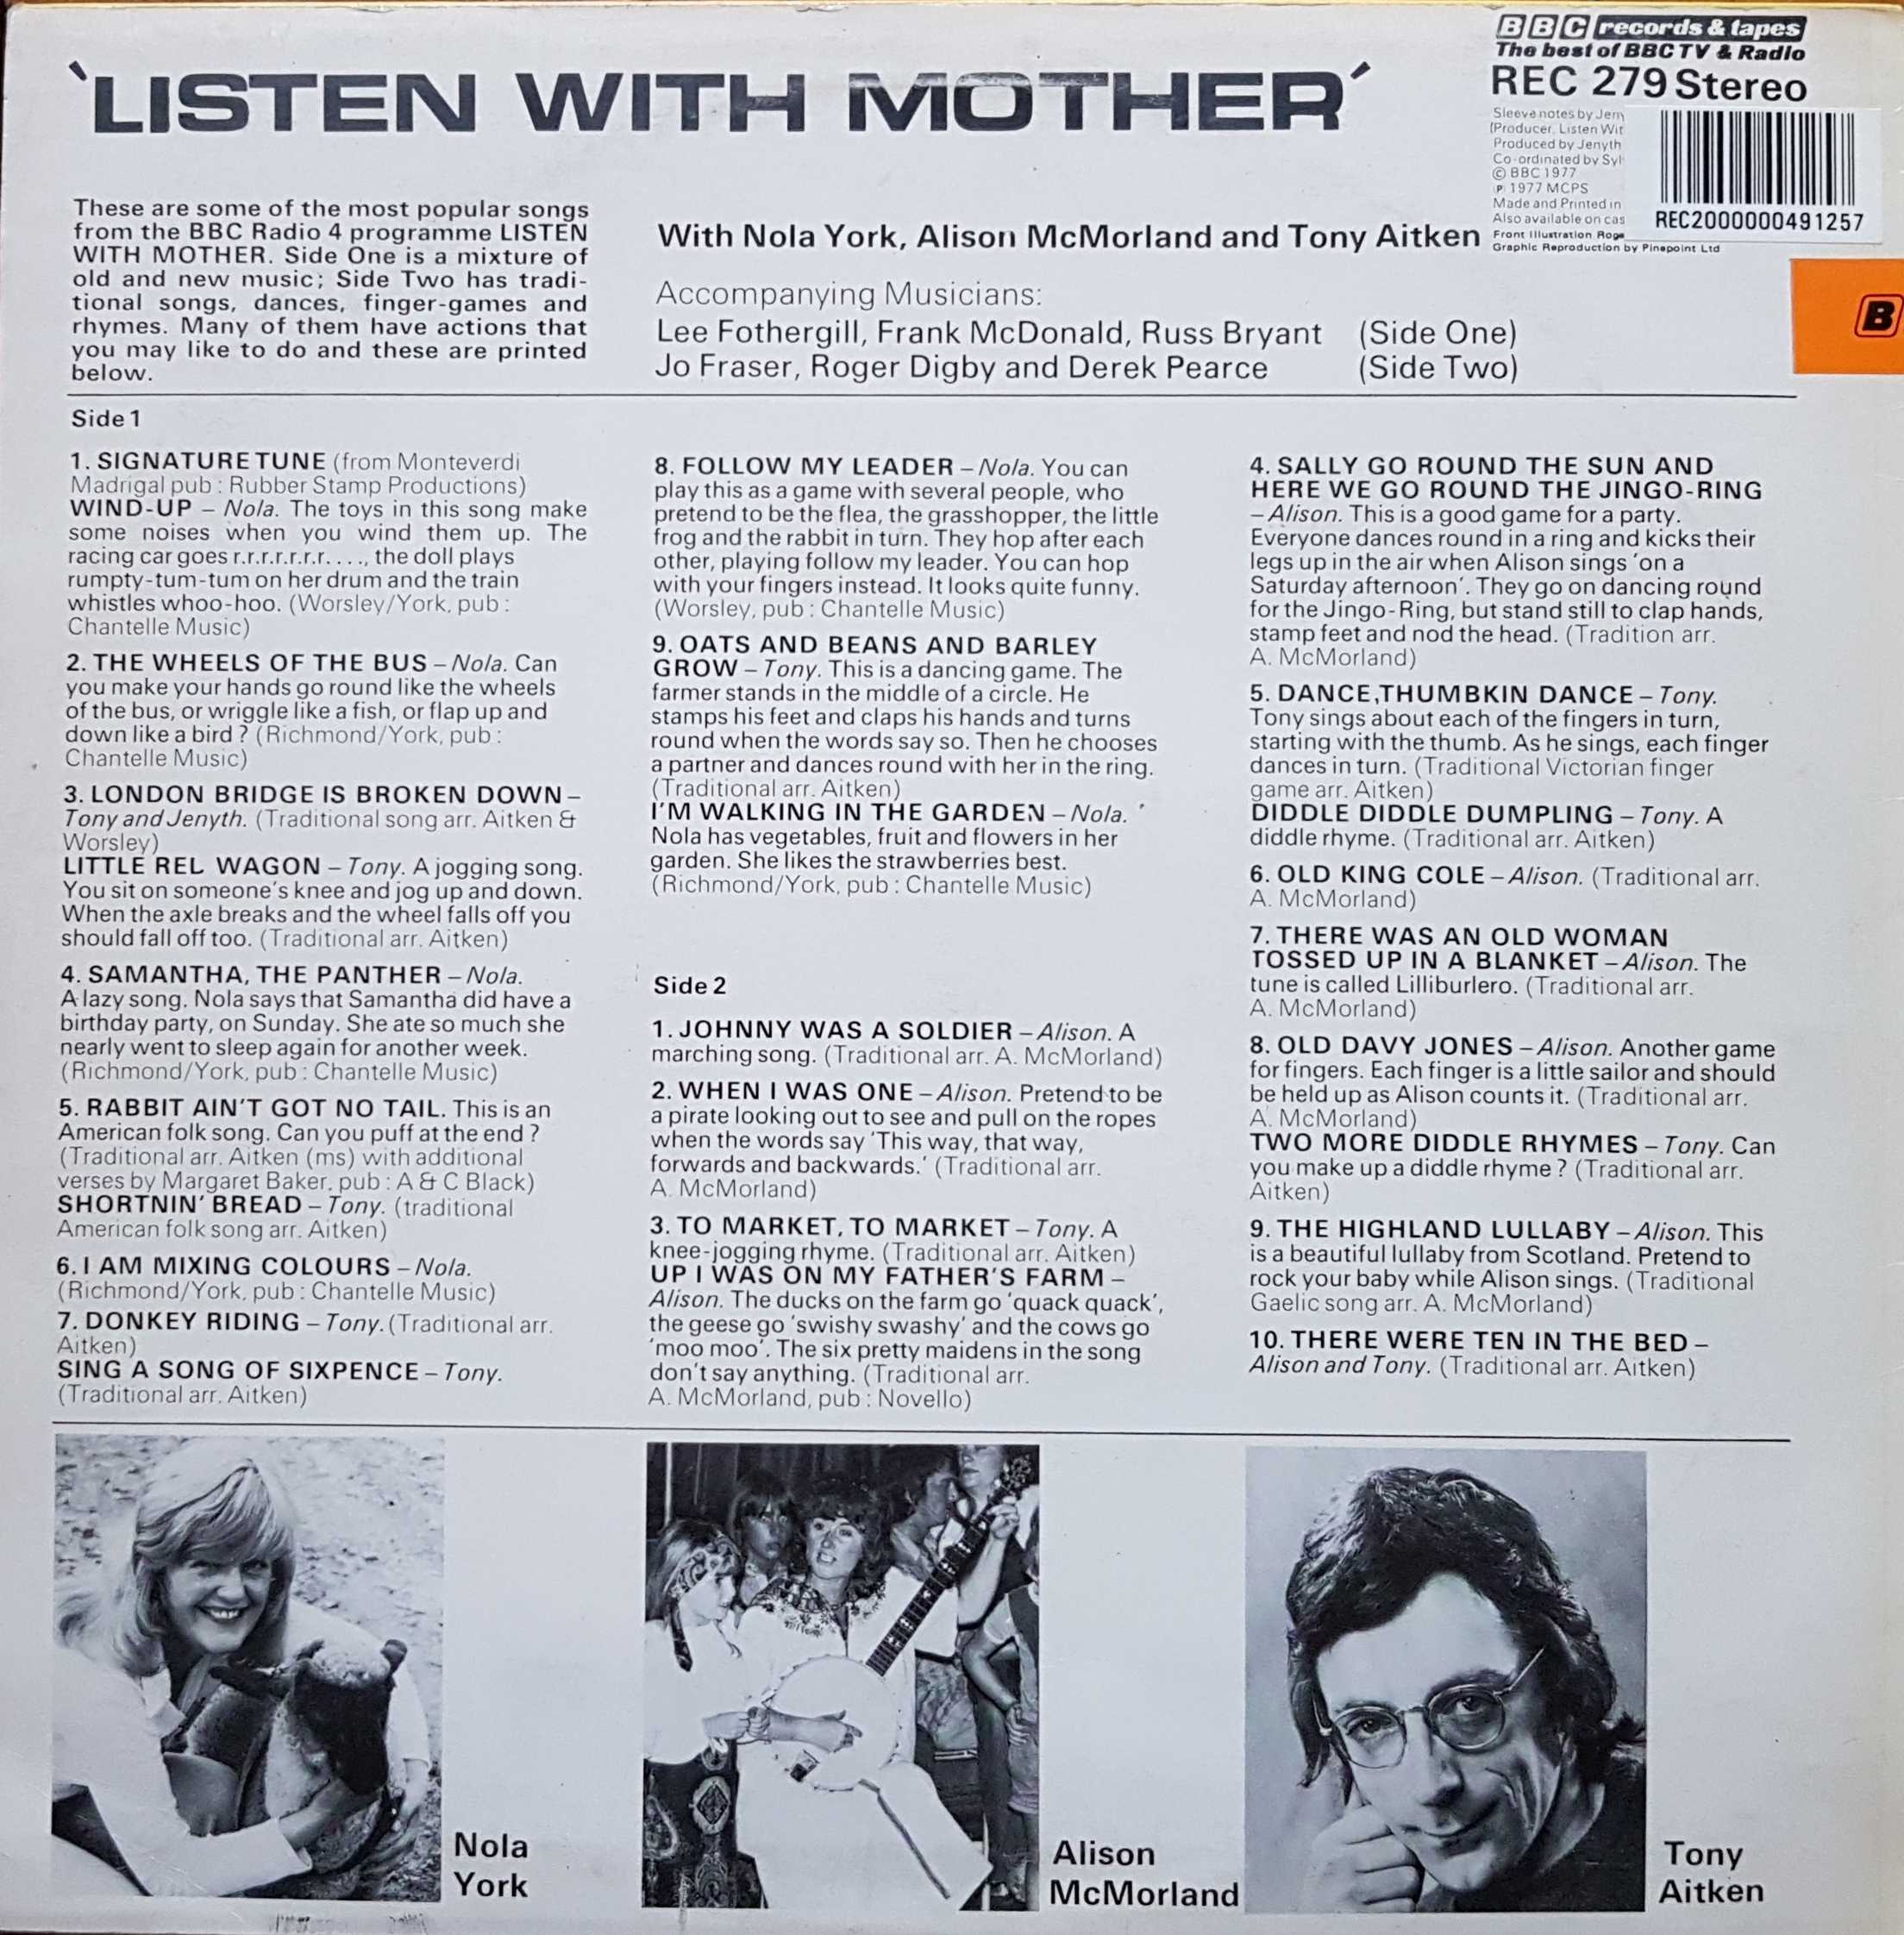 Picture of REC 279 Listen with mother by artist Various from the BBC records and Tapes library